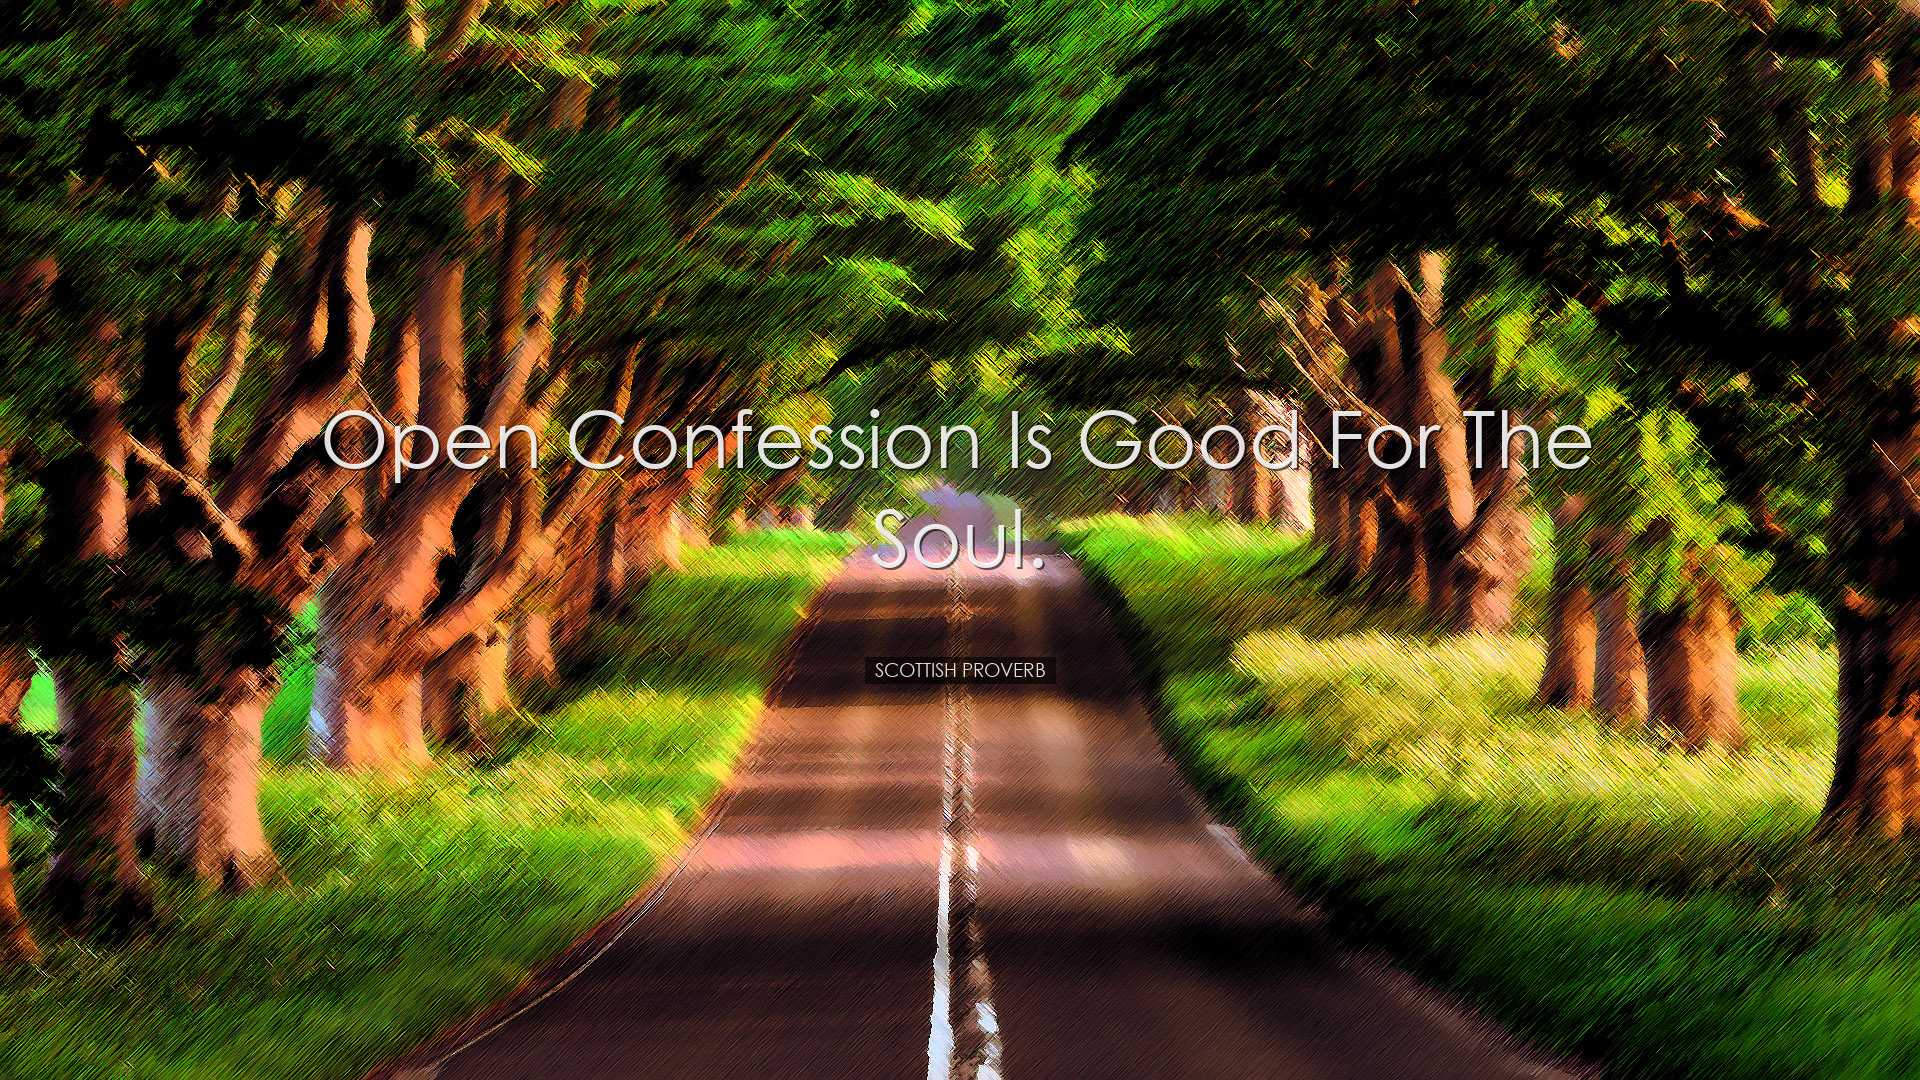 Open confession is good for the soul. - Scottish Proverb